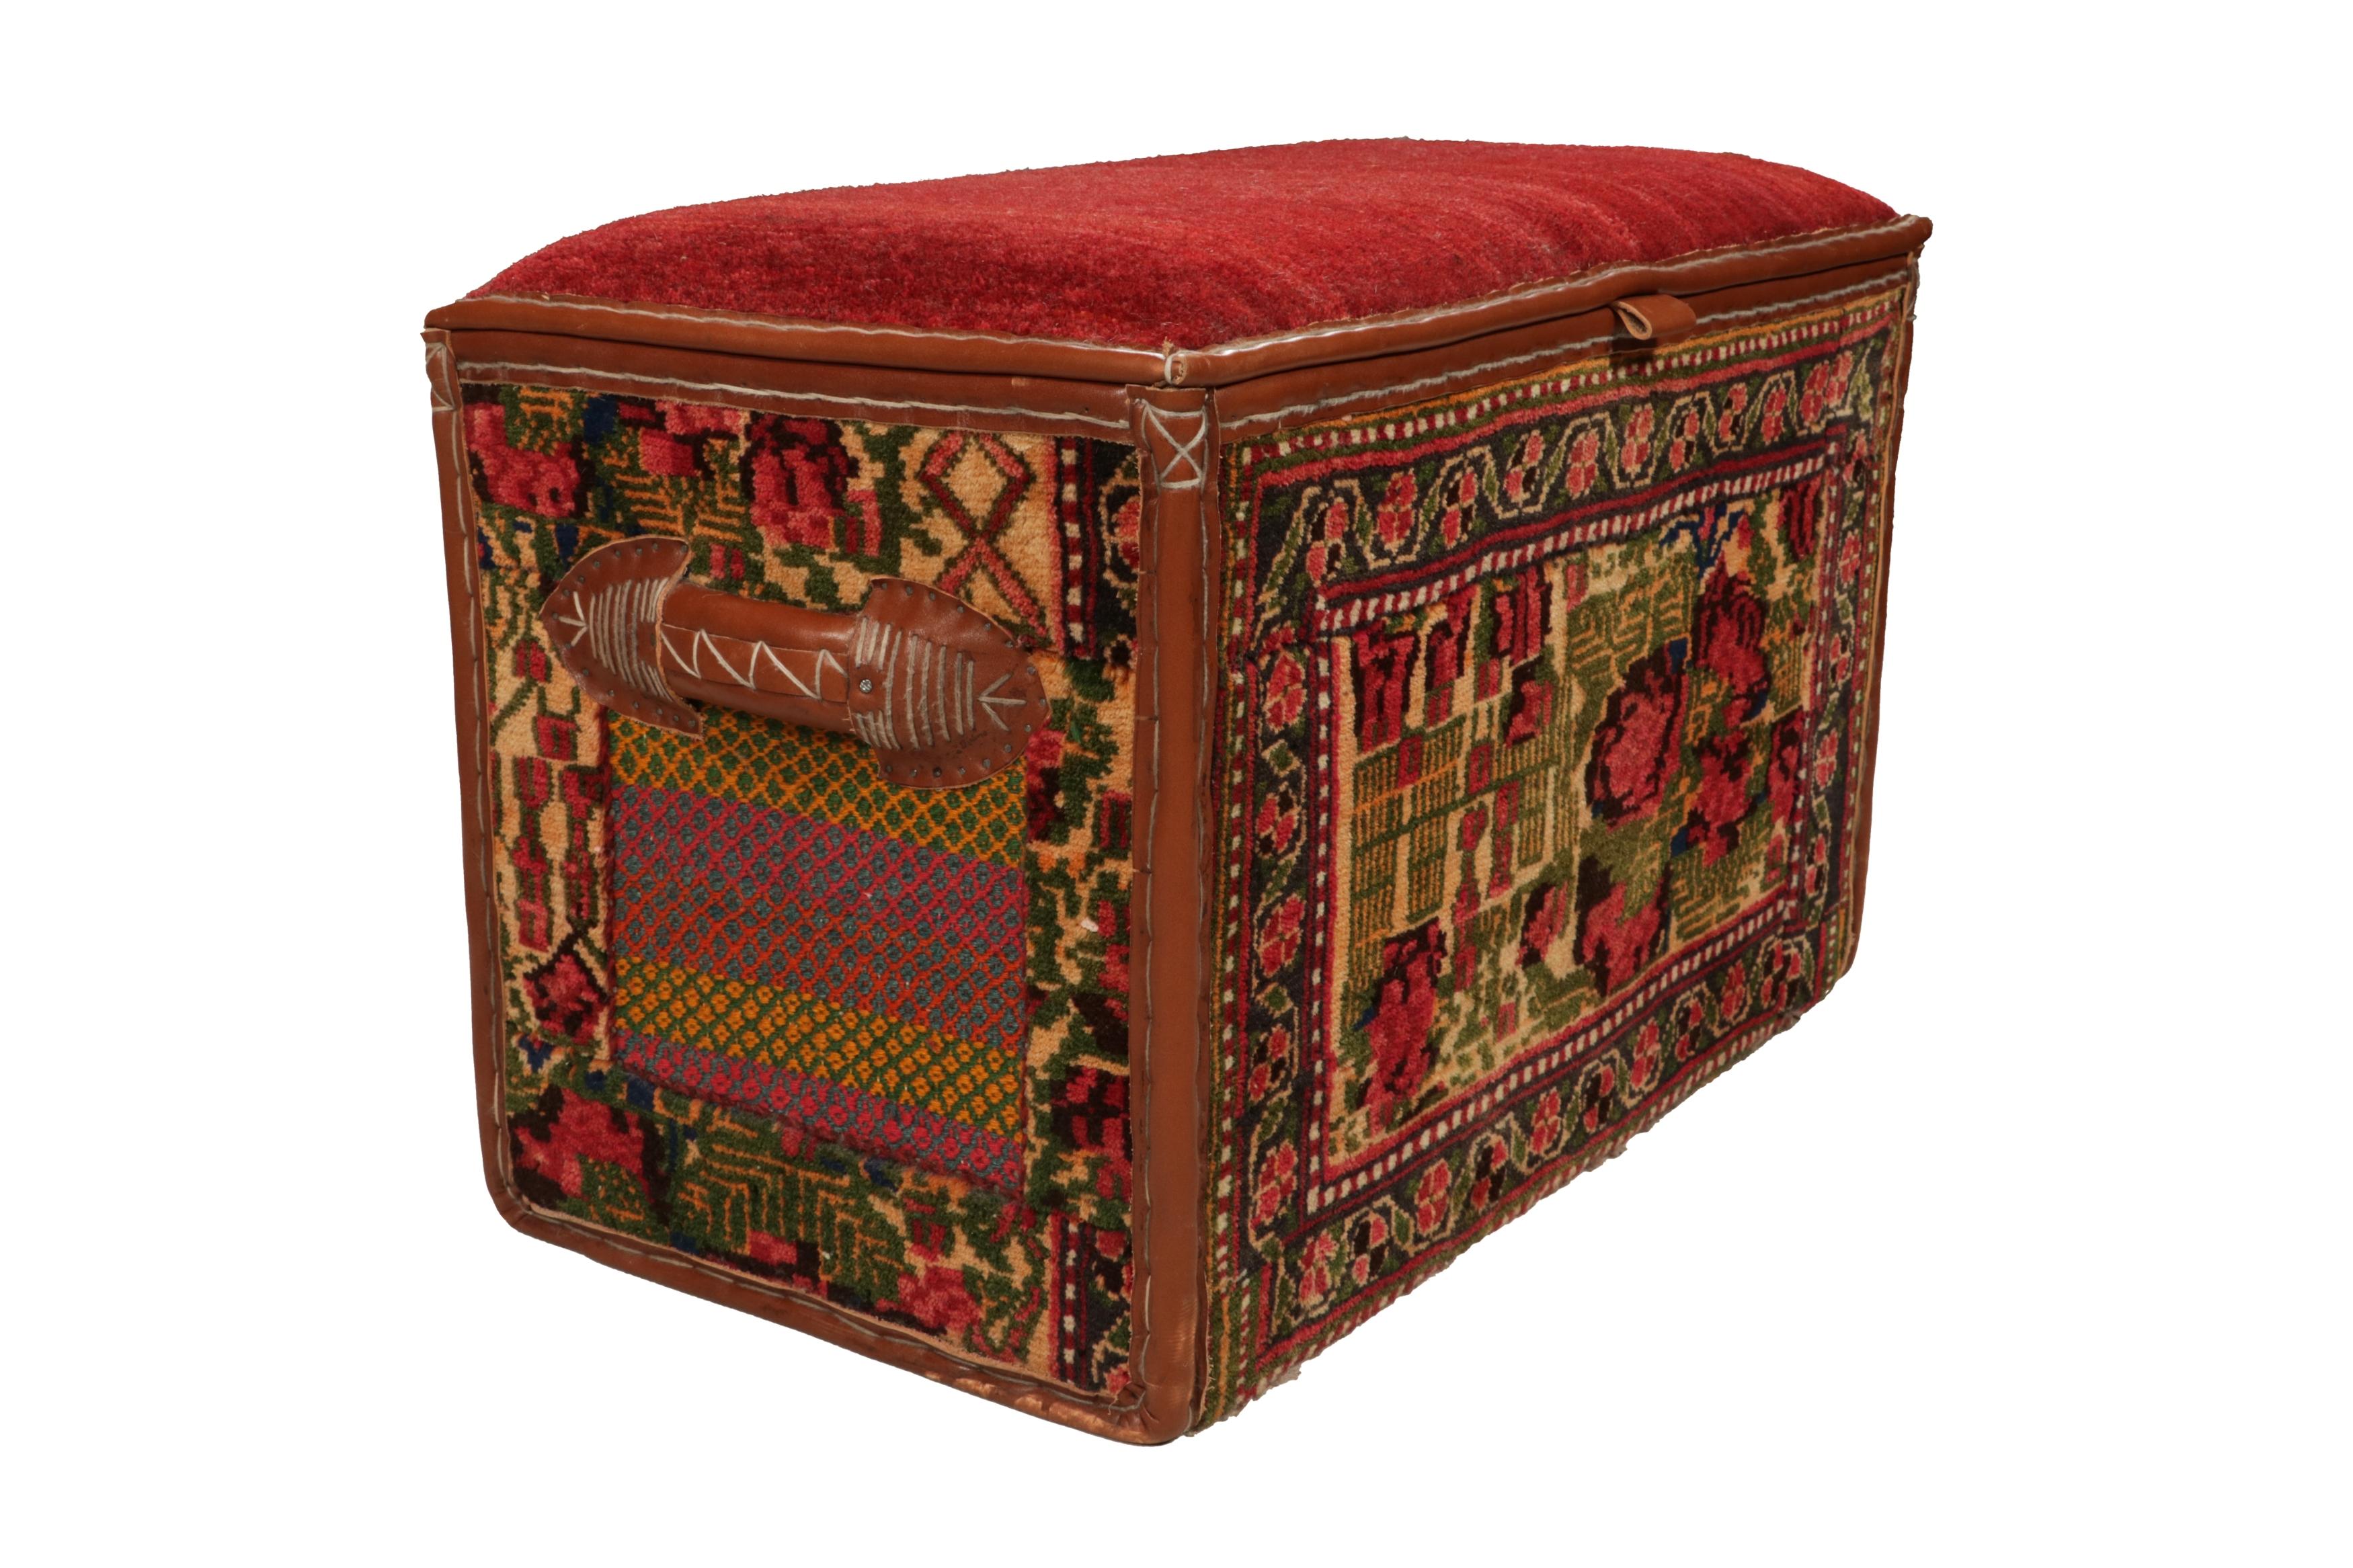 This storage chest is a collectible item in a rare new series from Rug & Kilim’s Modern Classics. 

Further on the Design:

Keen eyes will note that all four sides employ recycled vintage Persian tribal rugs in hand-knotted wool. The base is wood,